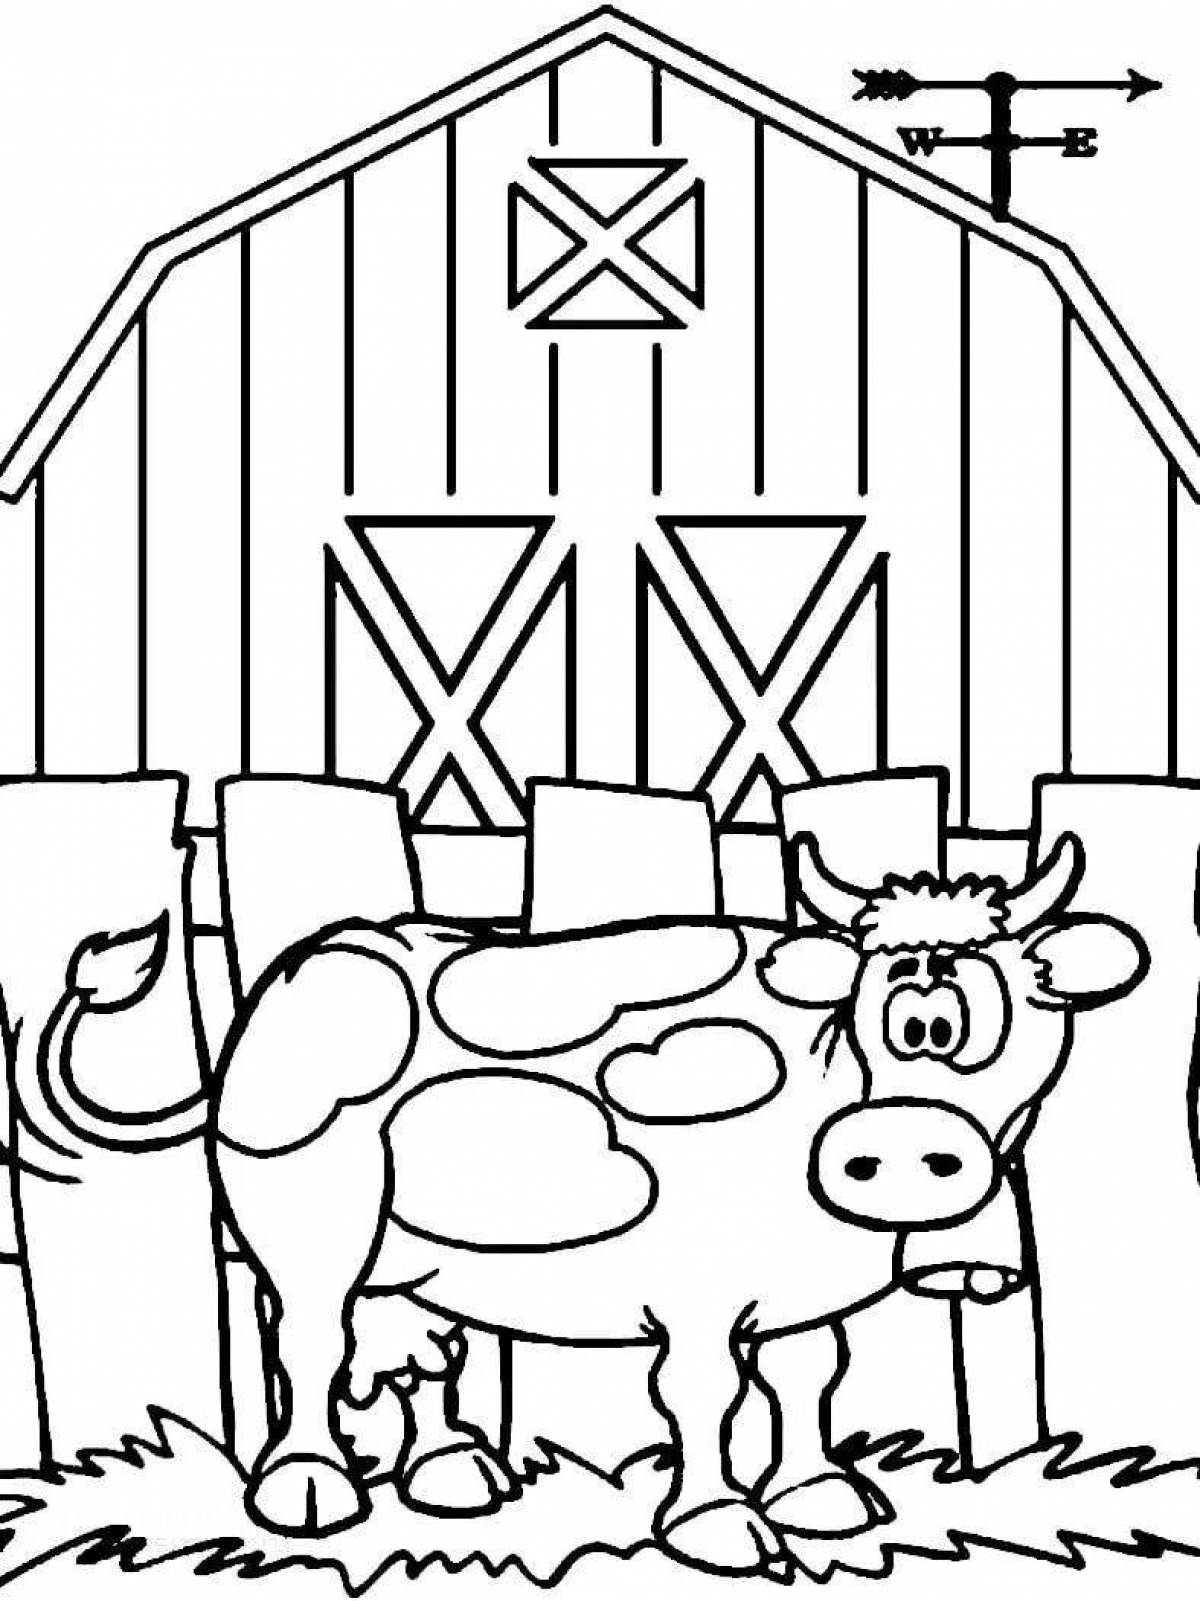 Funny farm coloring for kids